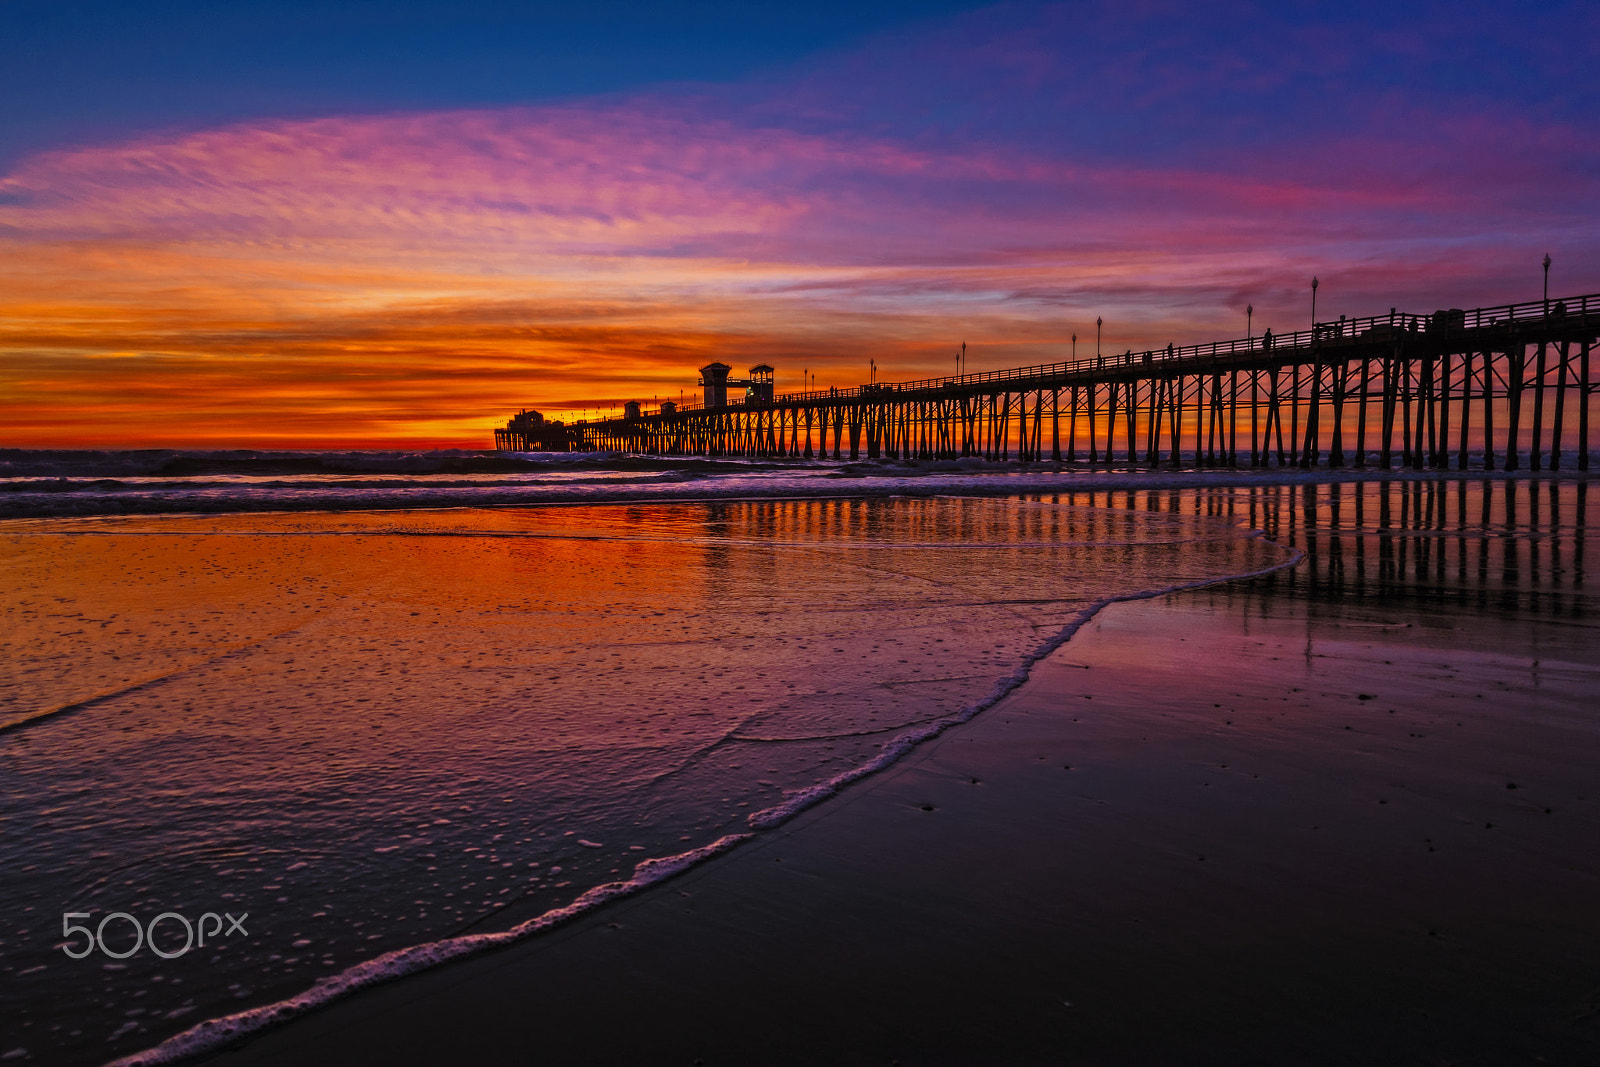 Nikon D500 sample photo. Fiery sunset at the pier in oceanside - january 17, 2017 photography